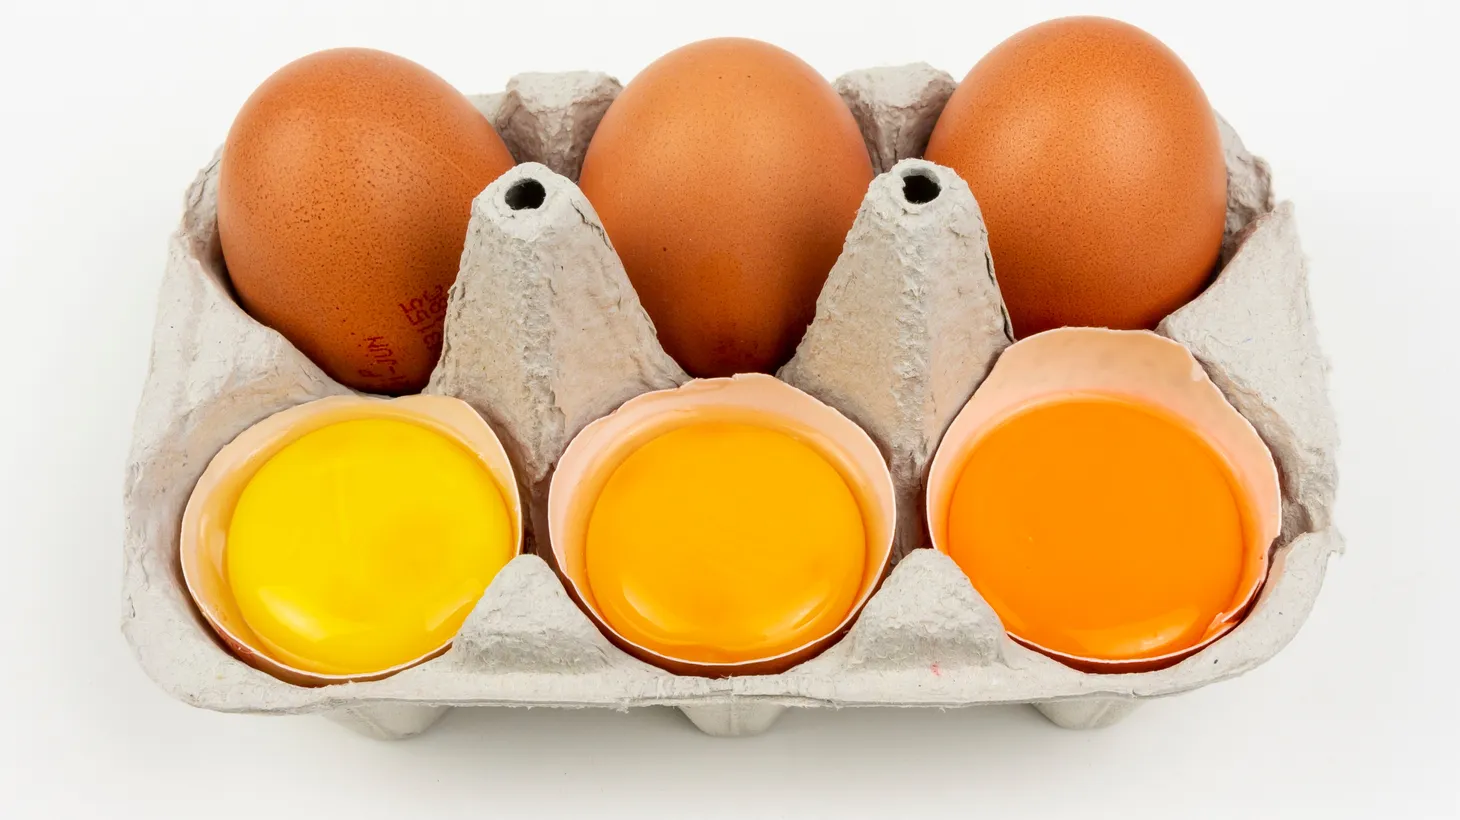 Americans' relationship with the egg yolk has changed over the course of the last 70 years.